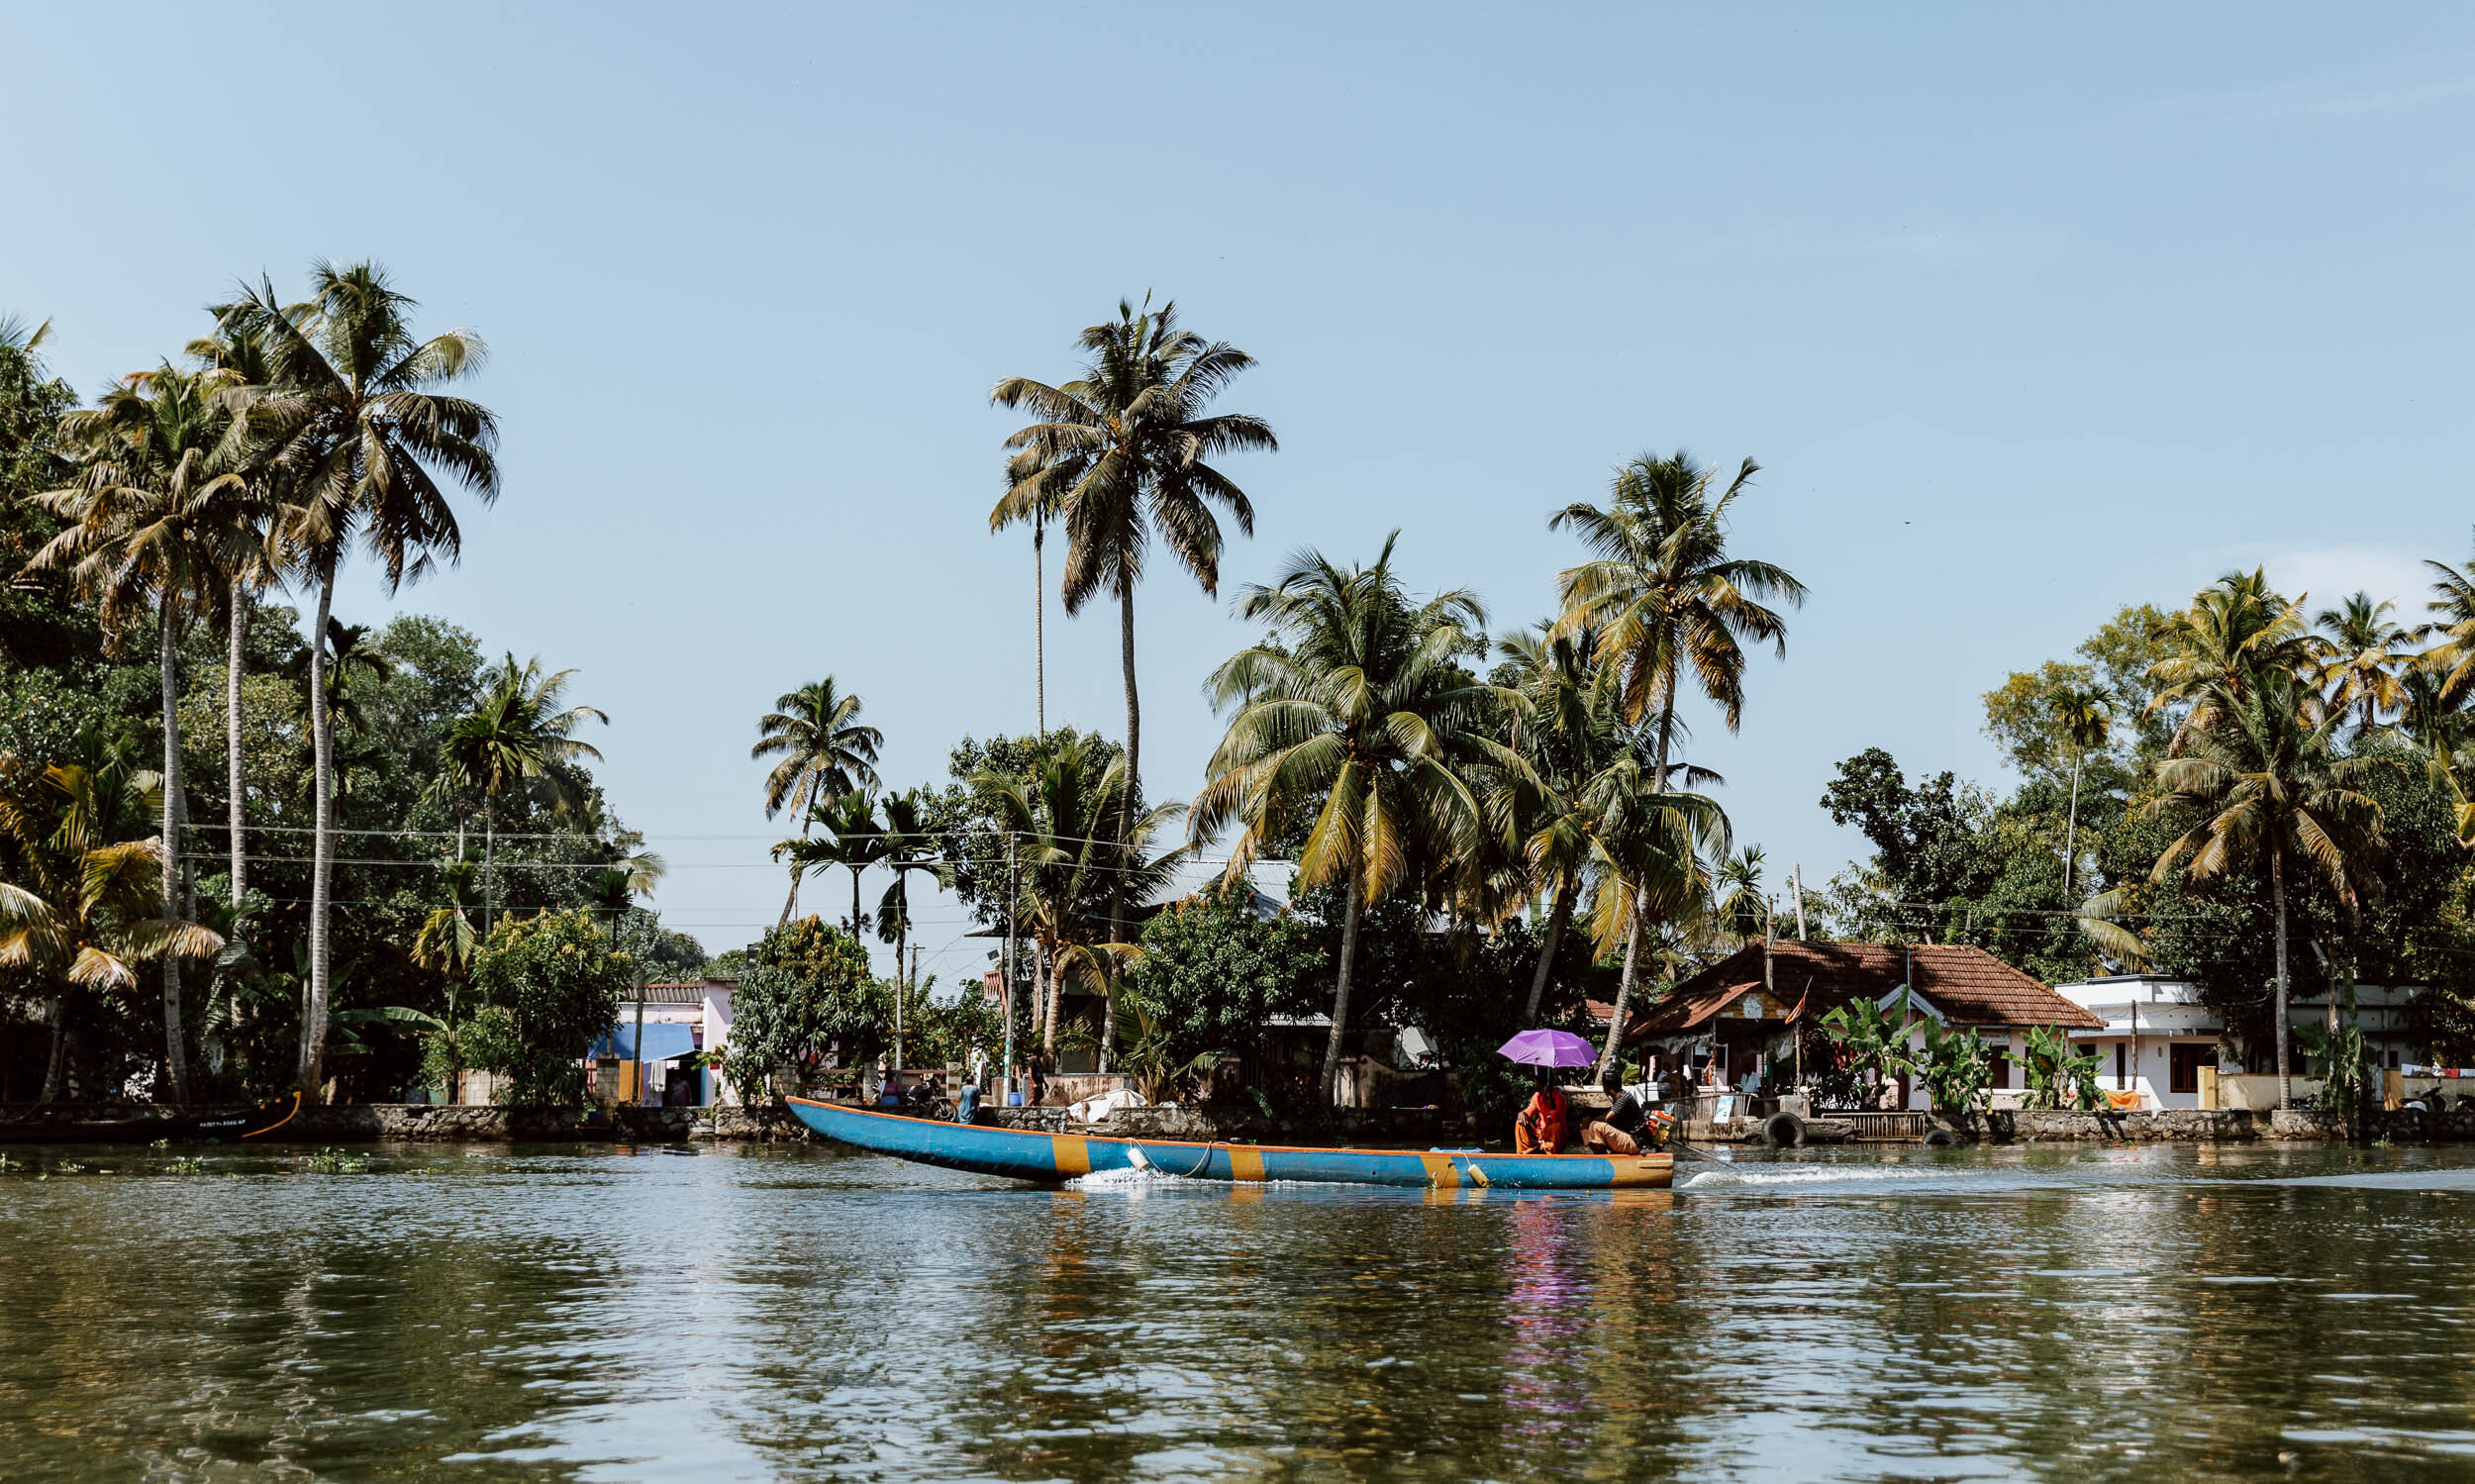 The Kerala Backwaters | 11 Things To Know Before You Visit — ALONG DUSTY ROADS